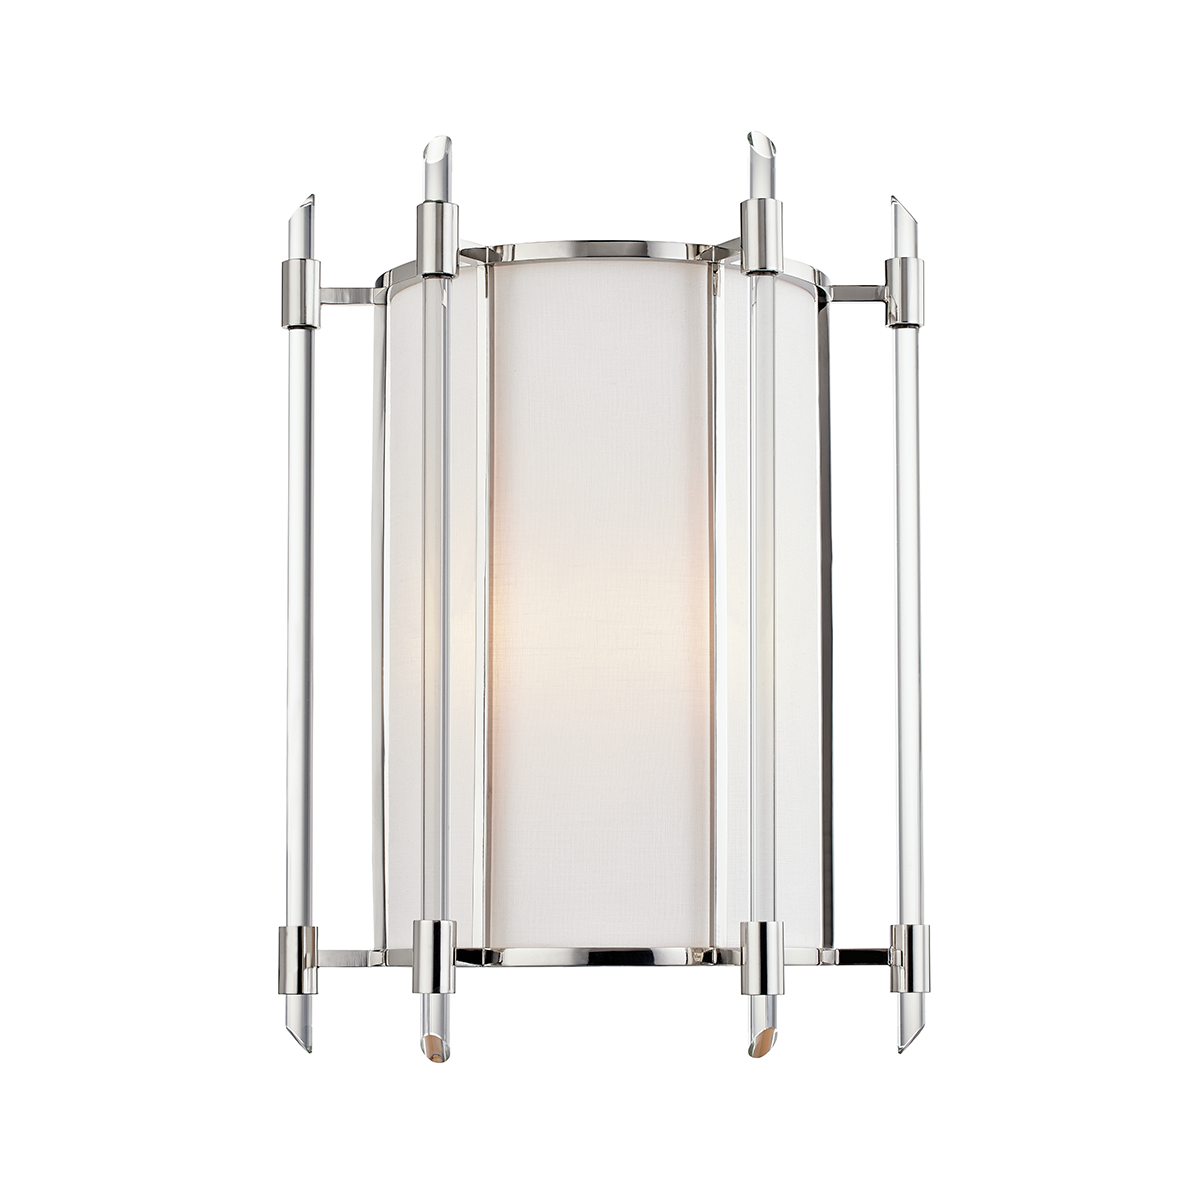 Delancey 2 Light Wall Sconce